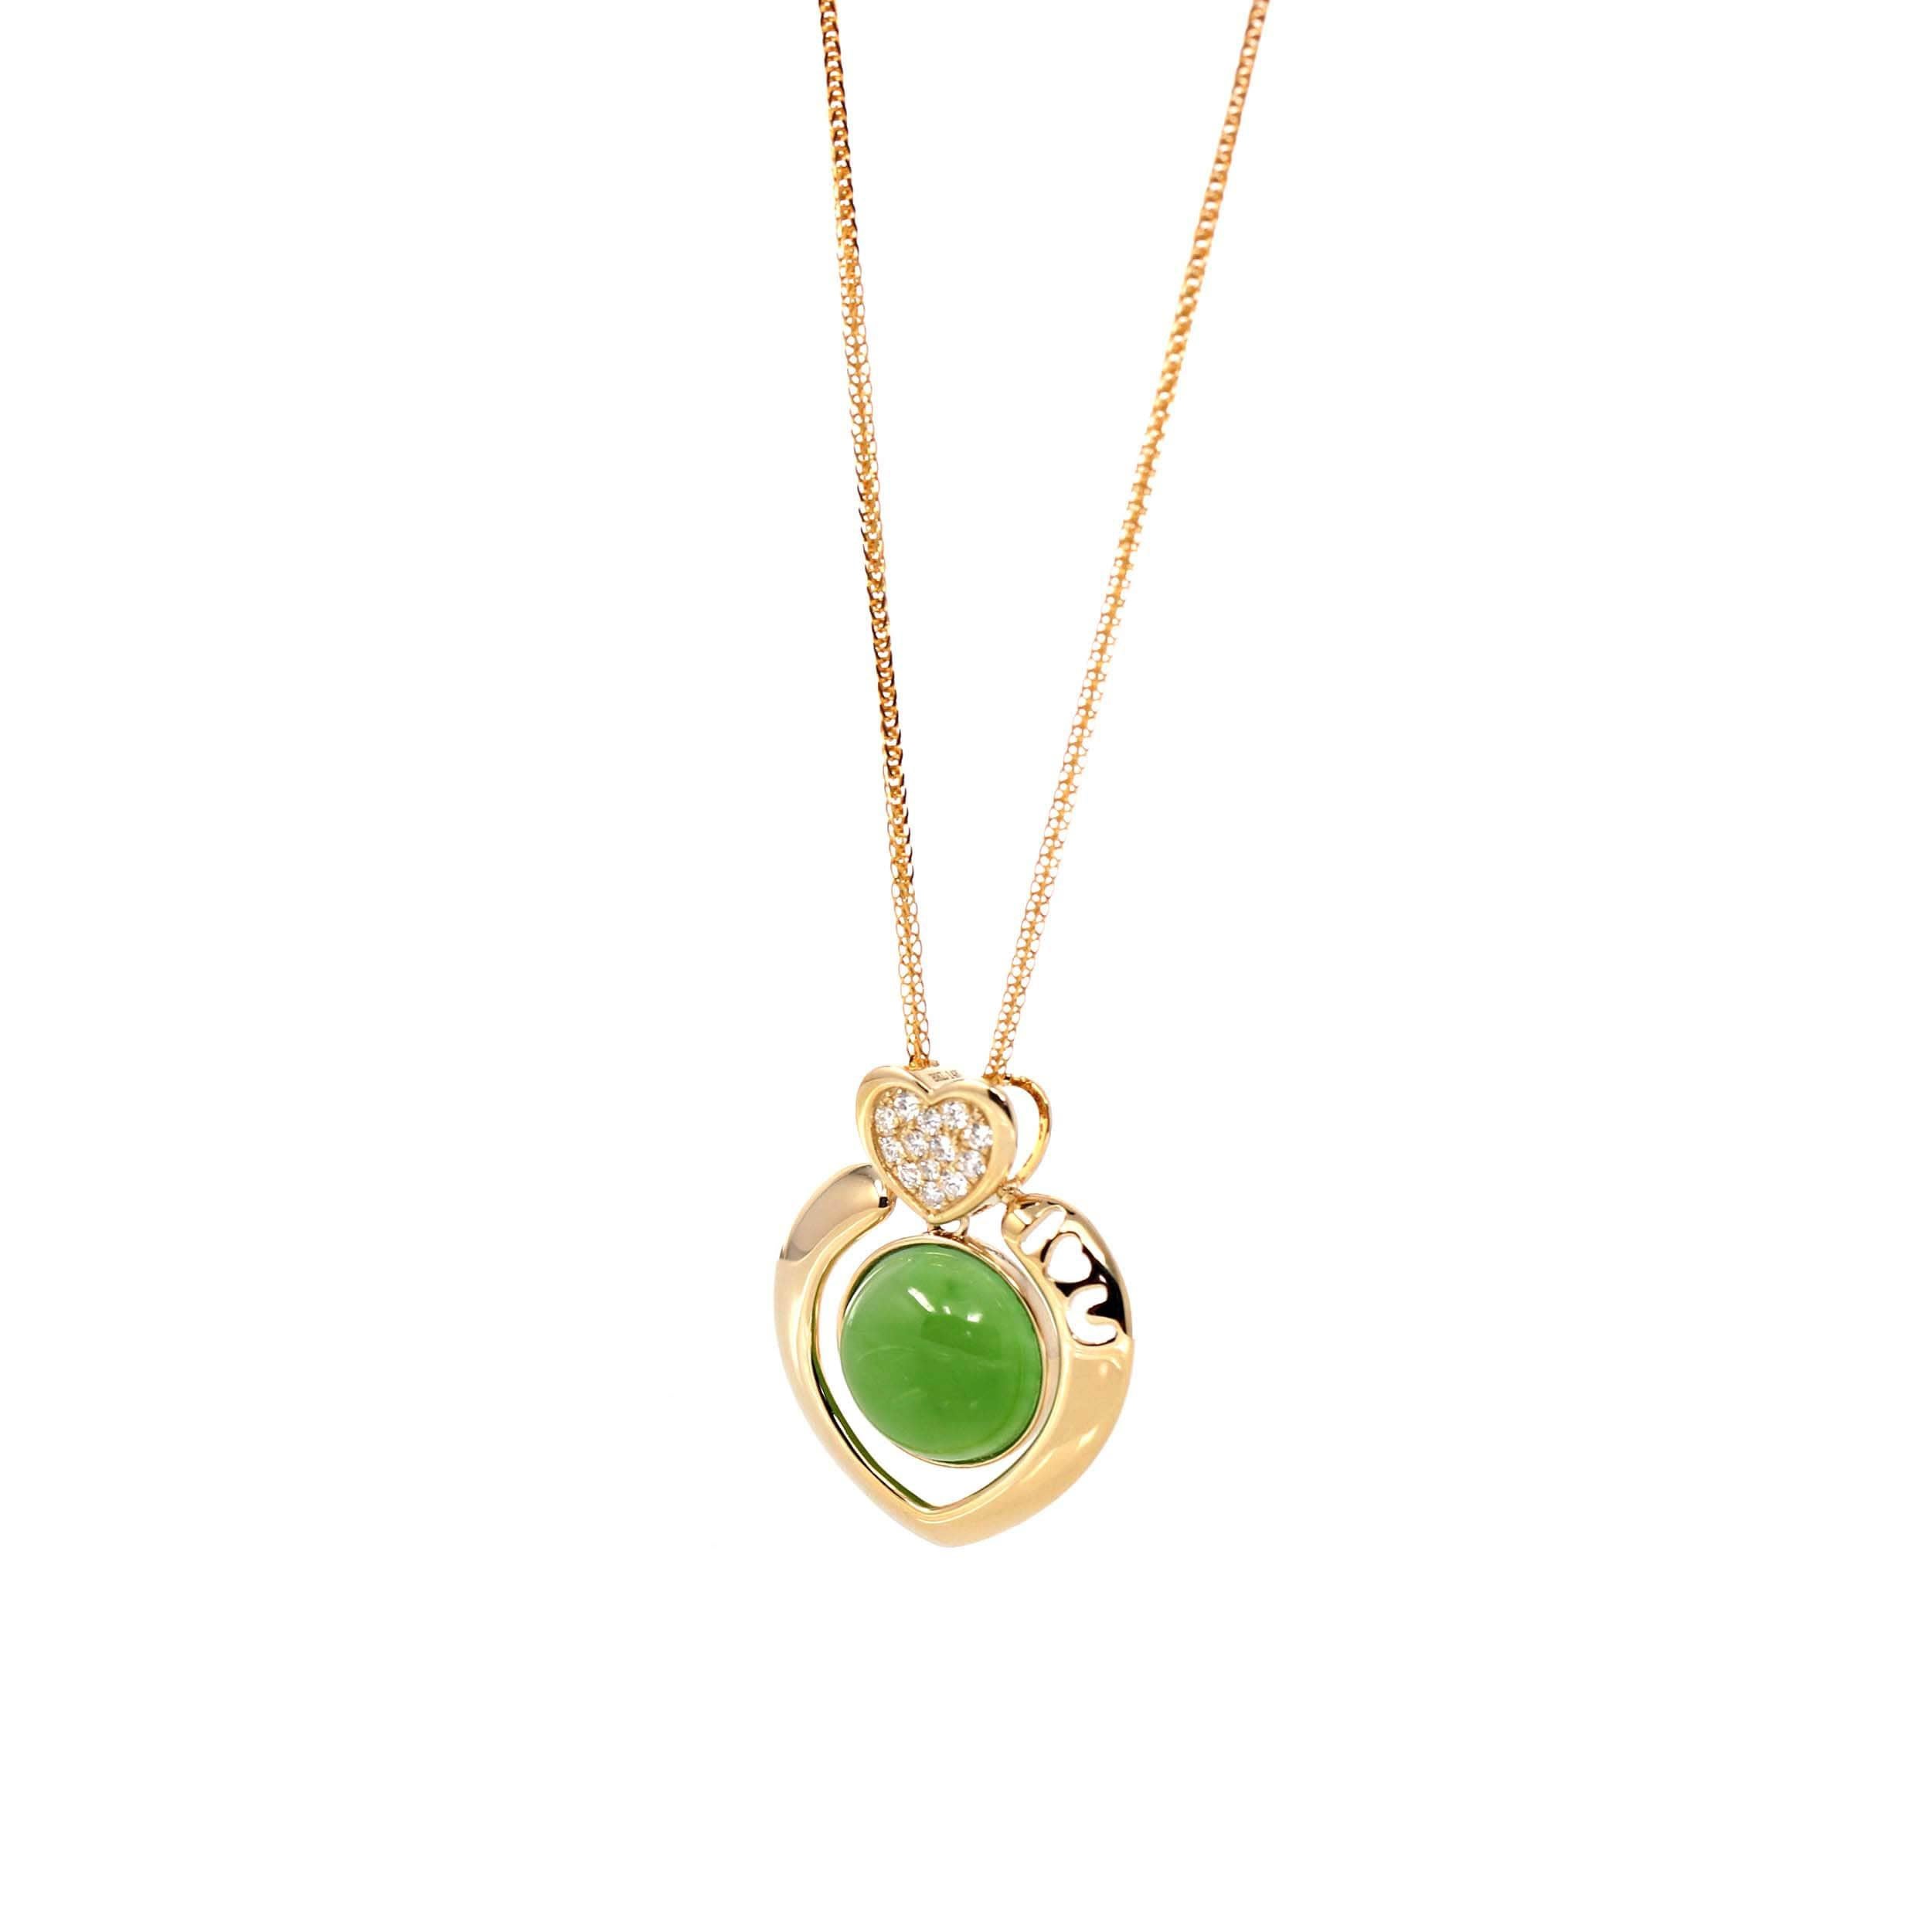 * INTRODUCTION----- This pendant is made with very high-quality genuine nephrite luxury apple green jade. It looks so luxurious and exquisite. The green jade looks so clean and smooth. And the color is lovely apple green. The style is simple and